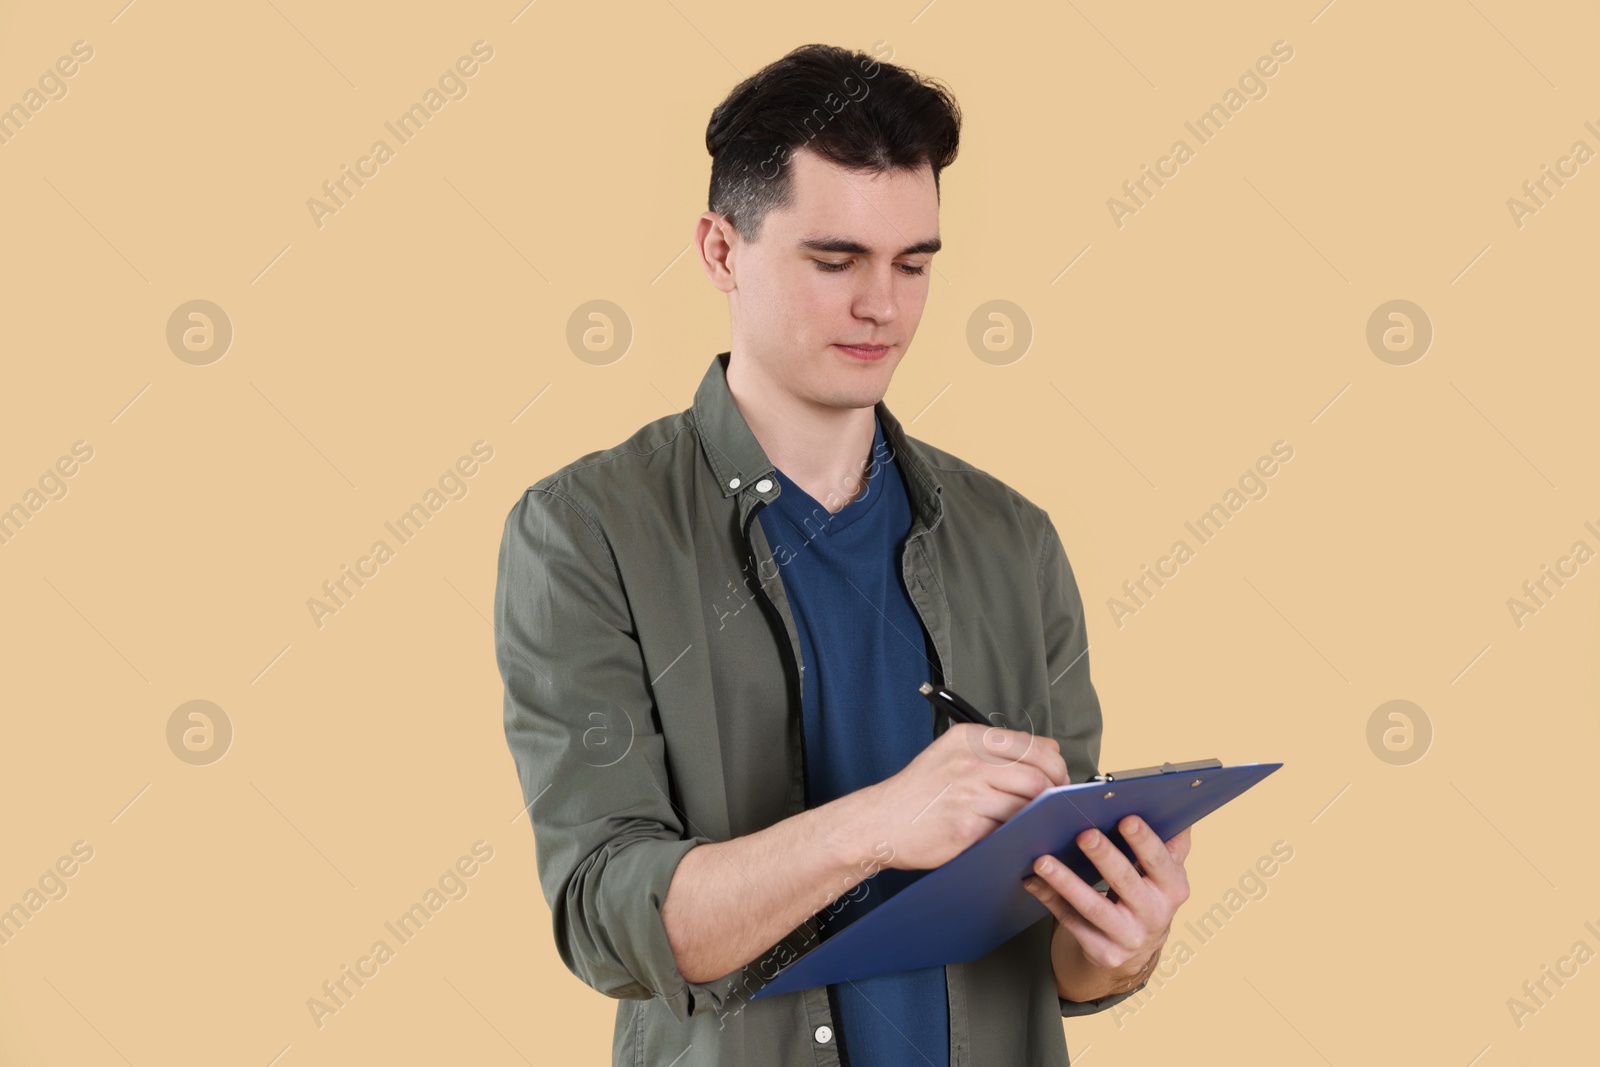 Photo of Handsome young man writing on clipboard against beige background